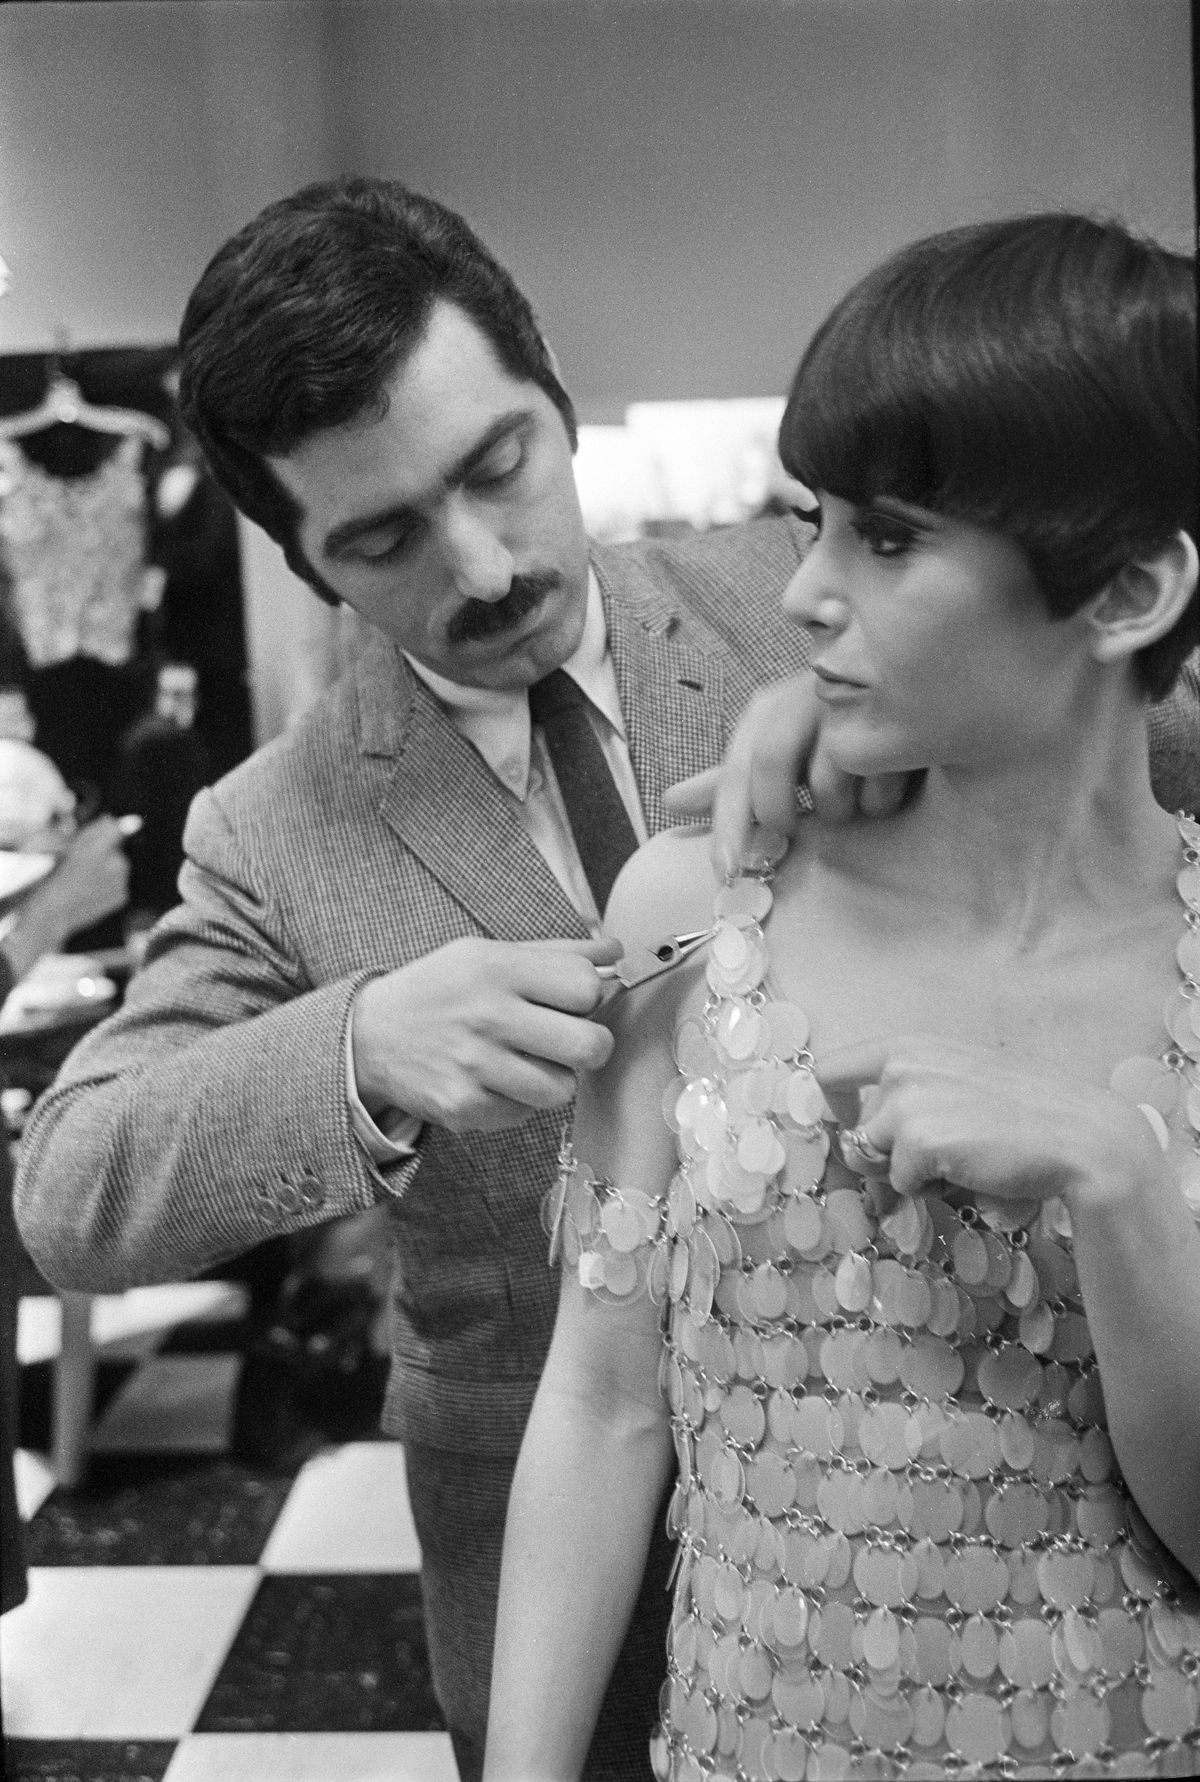 FILE -- The designer Paco Rabanne uses pliers to repair one of his plastic and metal dresses during a show at Lord & Taylor in New York, March 28, 1966. Rabanne, the Spanish designer whose futuristic creations gave shape to the dreams of the space age and redefined couture, died in Portsall, France on Feb. 3, 2023. He was 88. (Neal Boenzi/The New York Times).  (NEAL BOENZI)